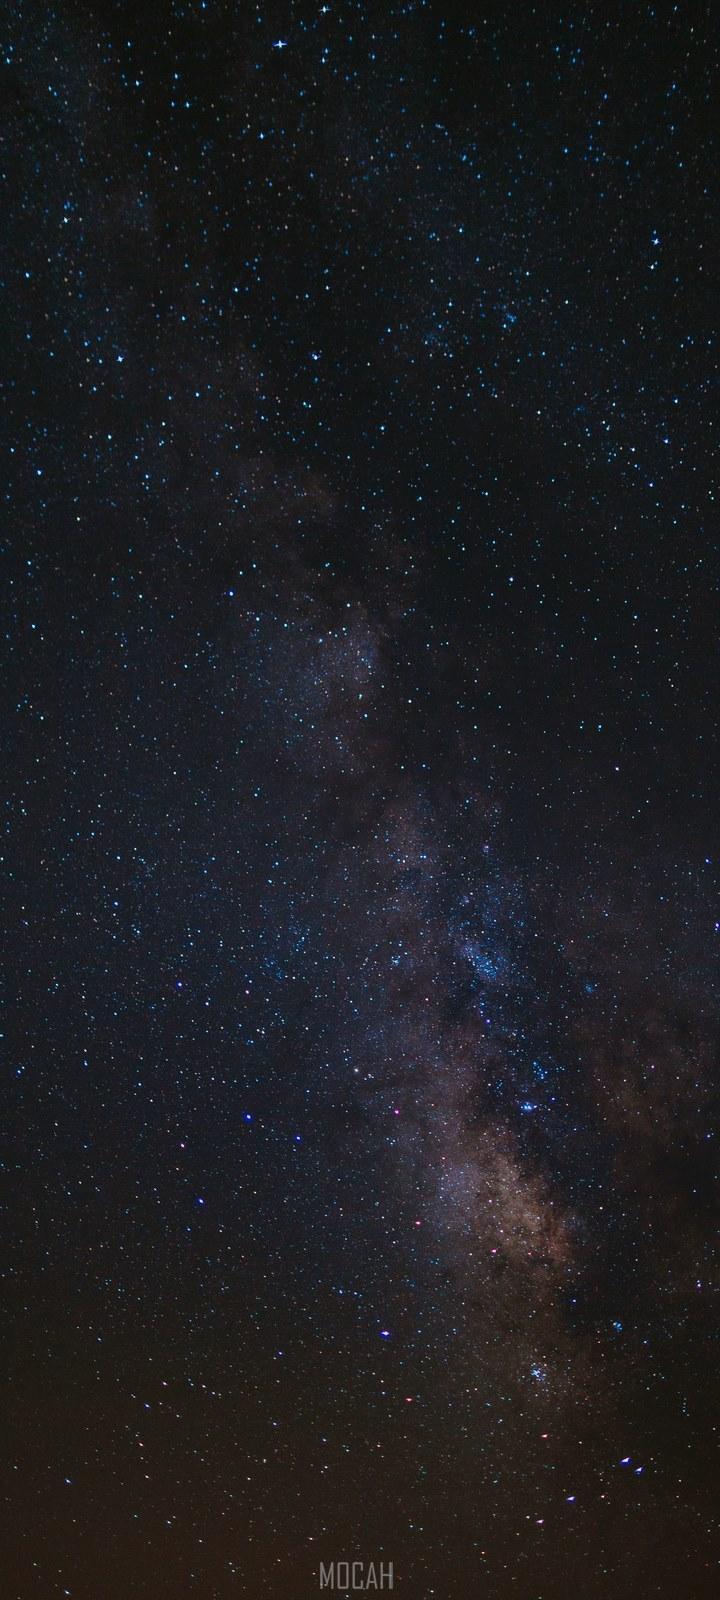 HD wallpaper, Milky Way From Max Patch, Nokia C5 Endi Wallpaper Hd Free Download, 720X1600